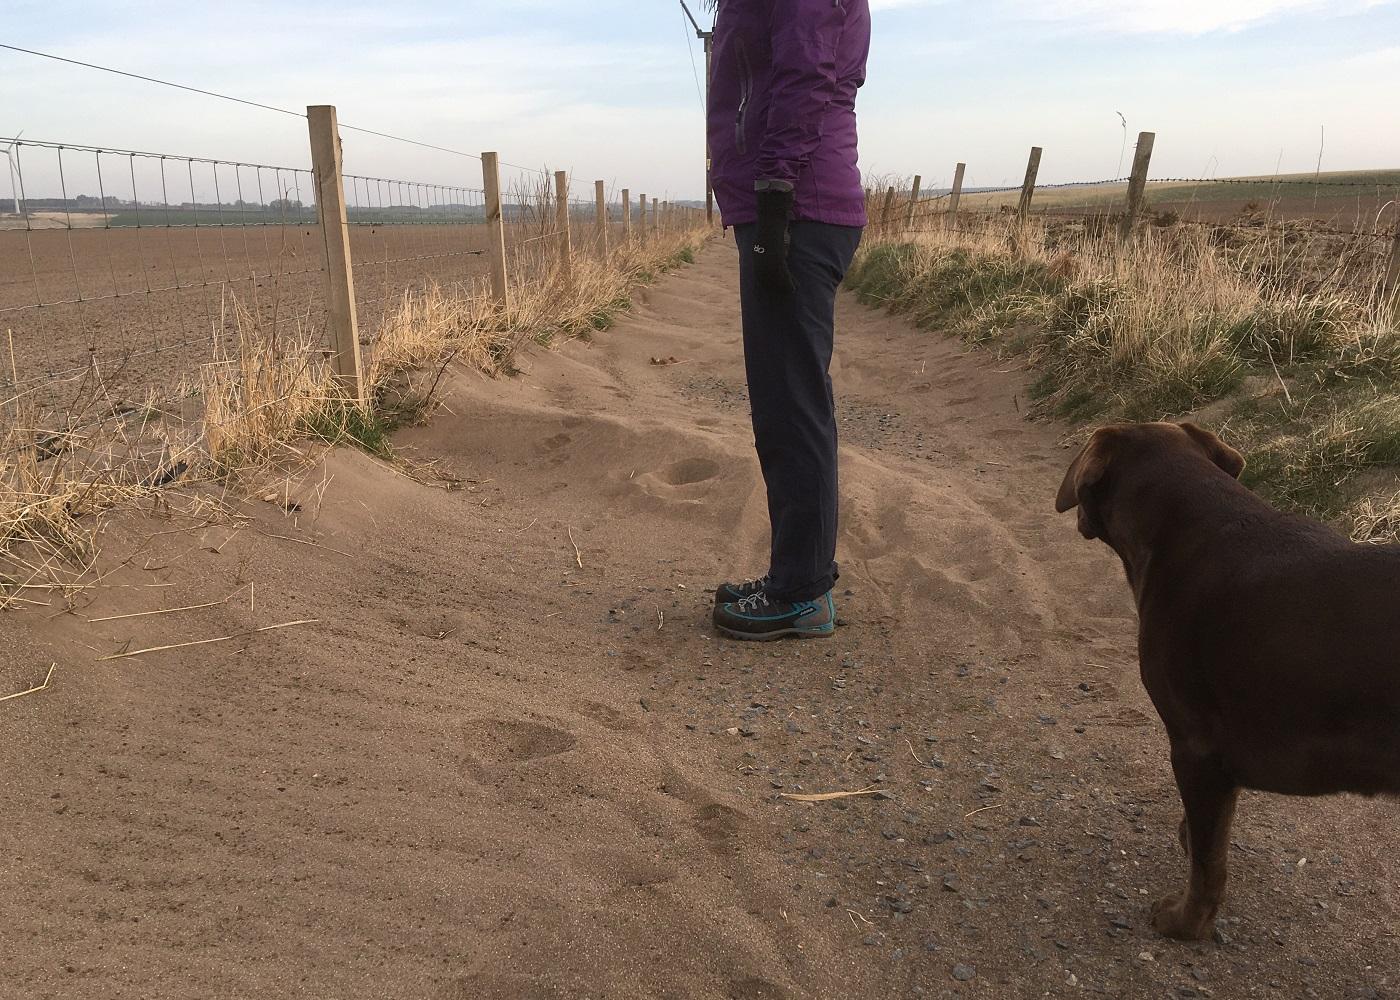 Dog walker and dog on path covered in sand surrounded by farmland.